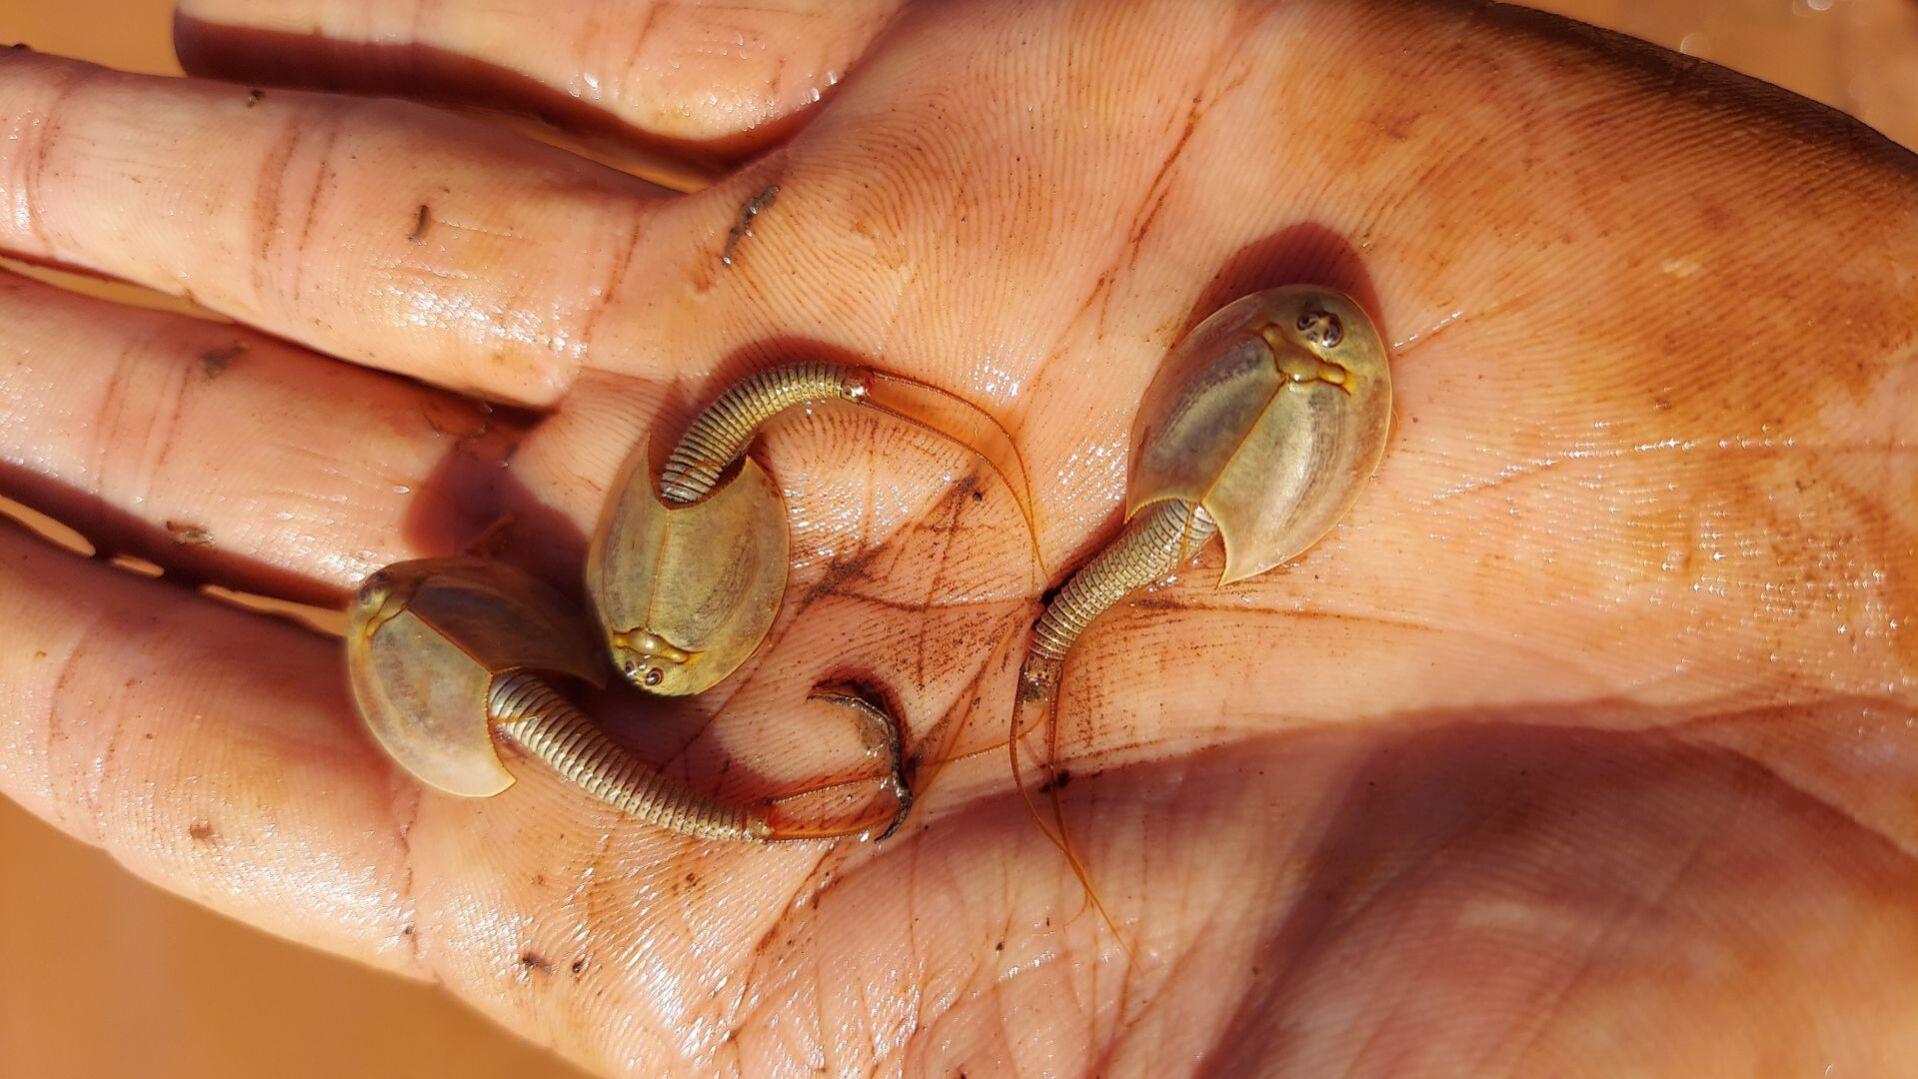 Living Fossil (Triops) Life Cycle Kit